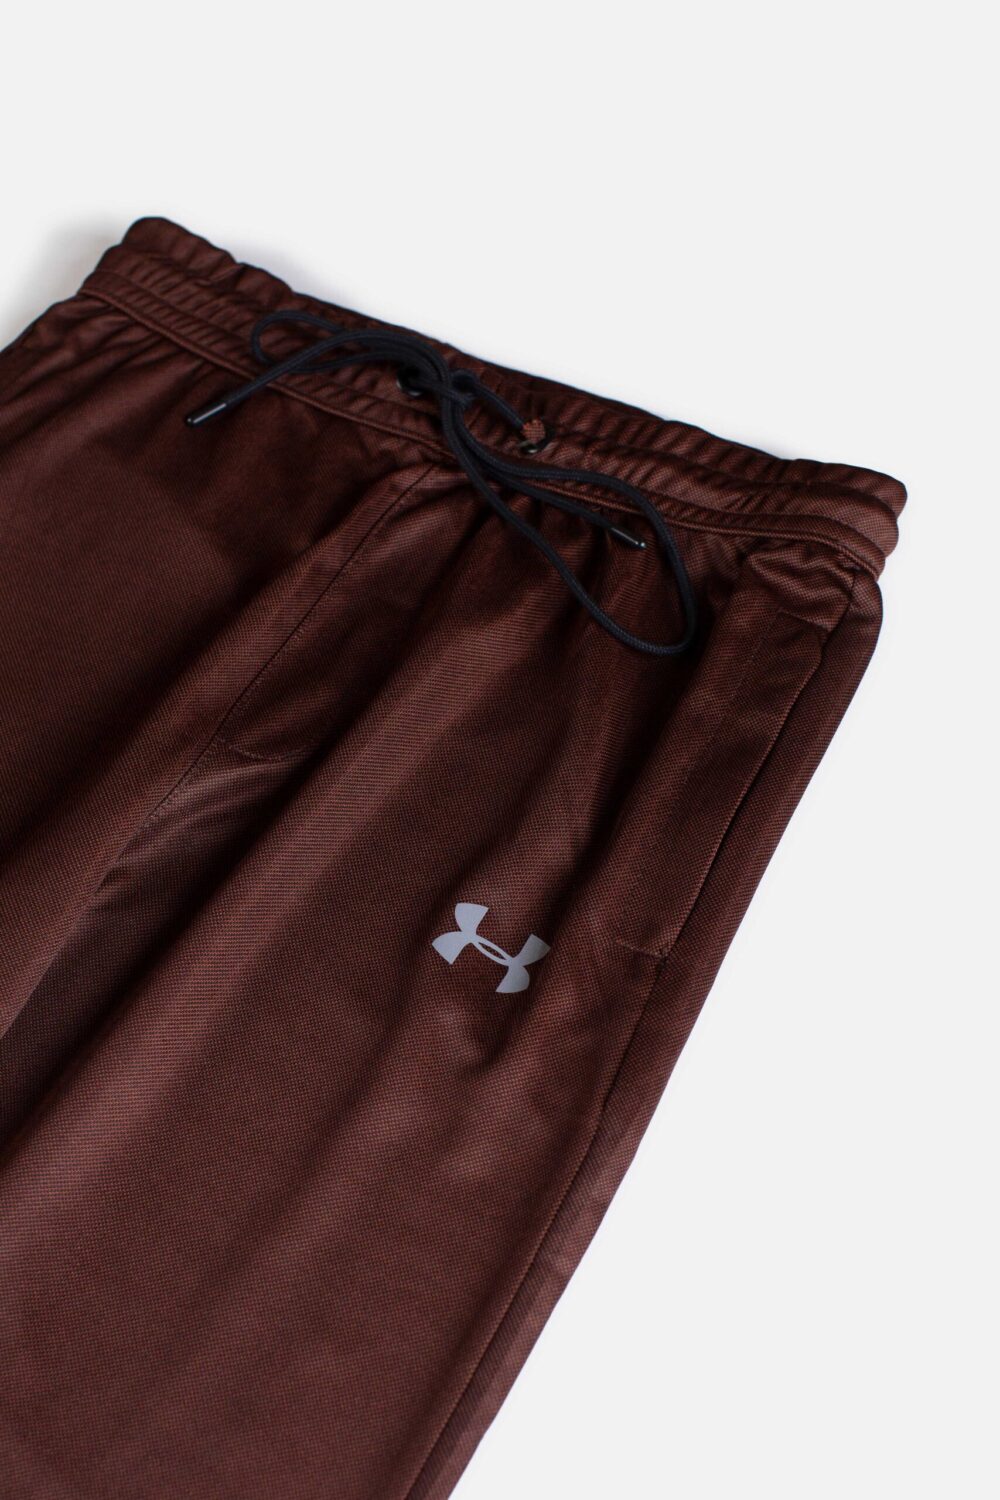 Under Armour Dri Fit Trouser – Mohogany